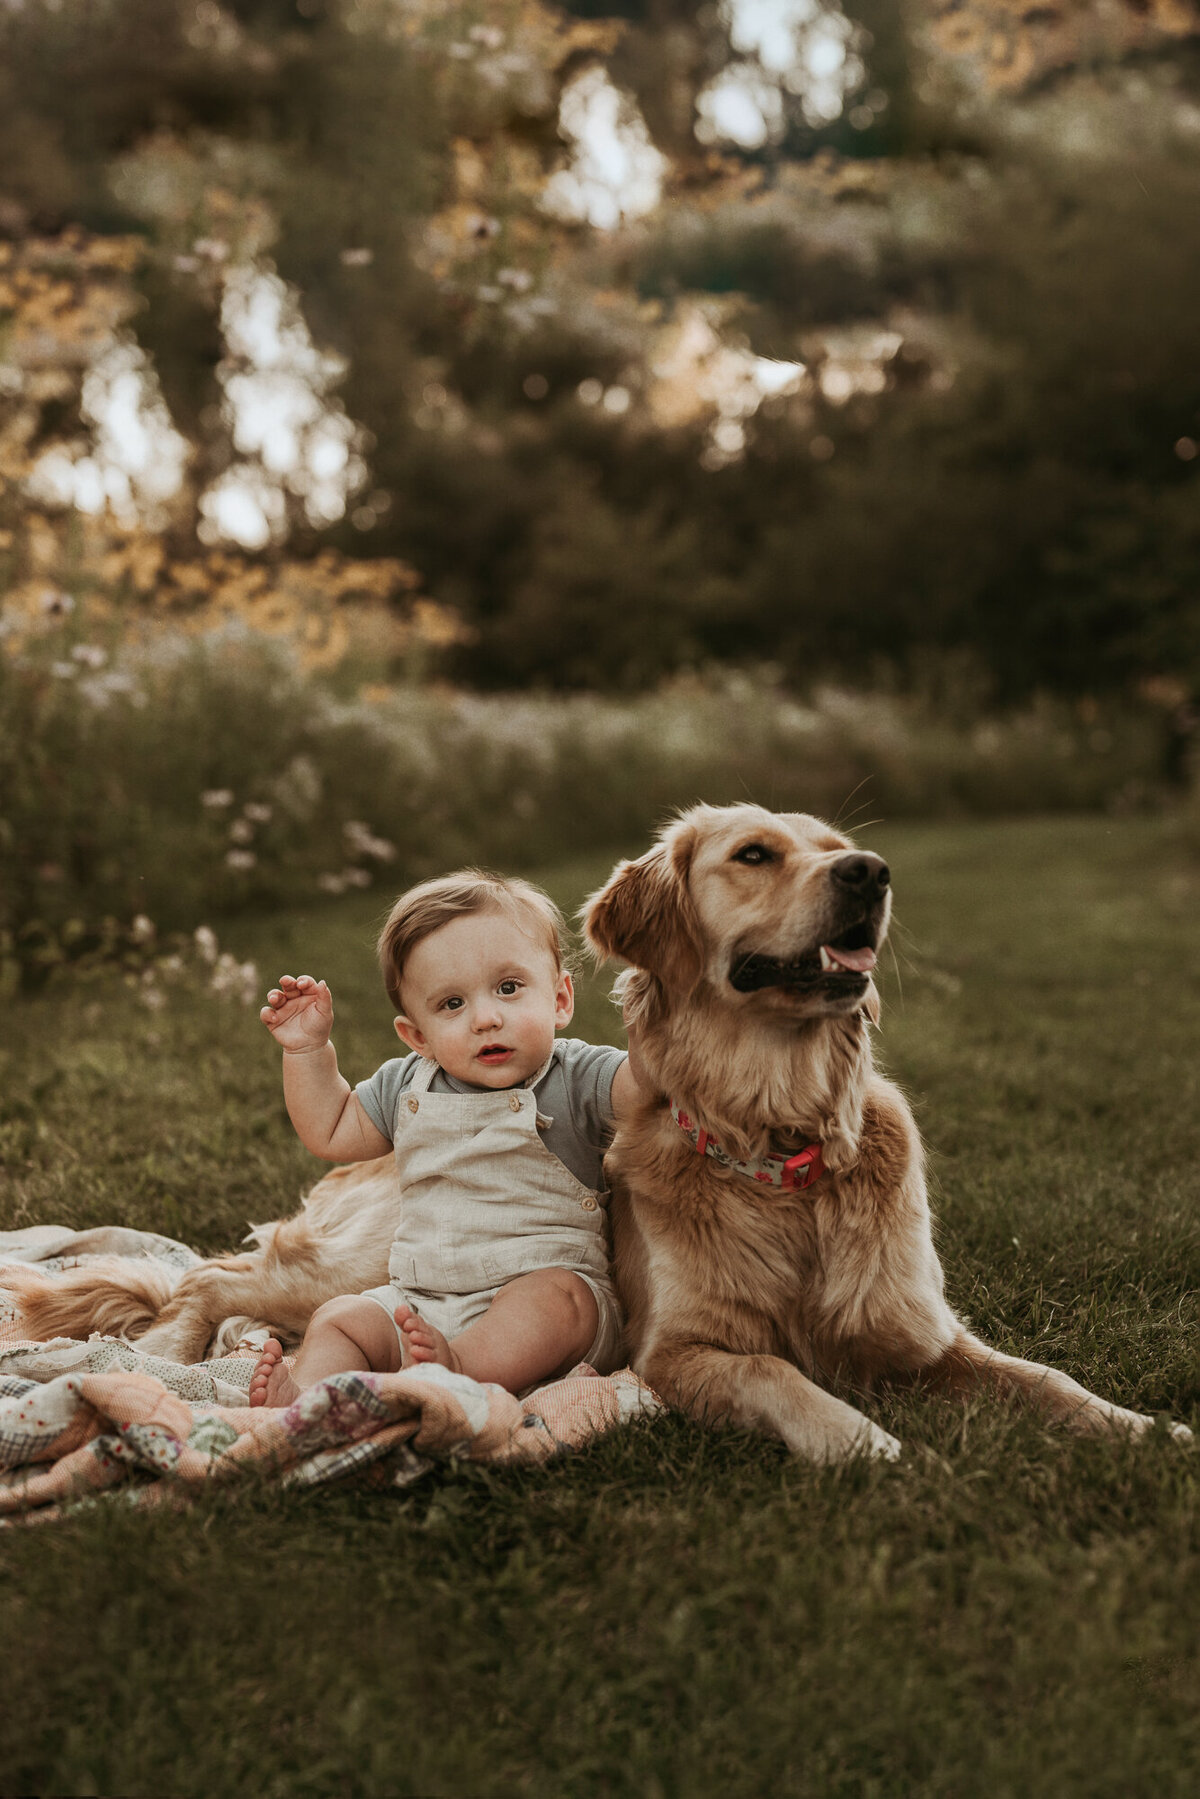 baby and golden retriever cuddle in the grass